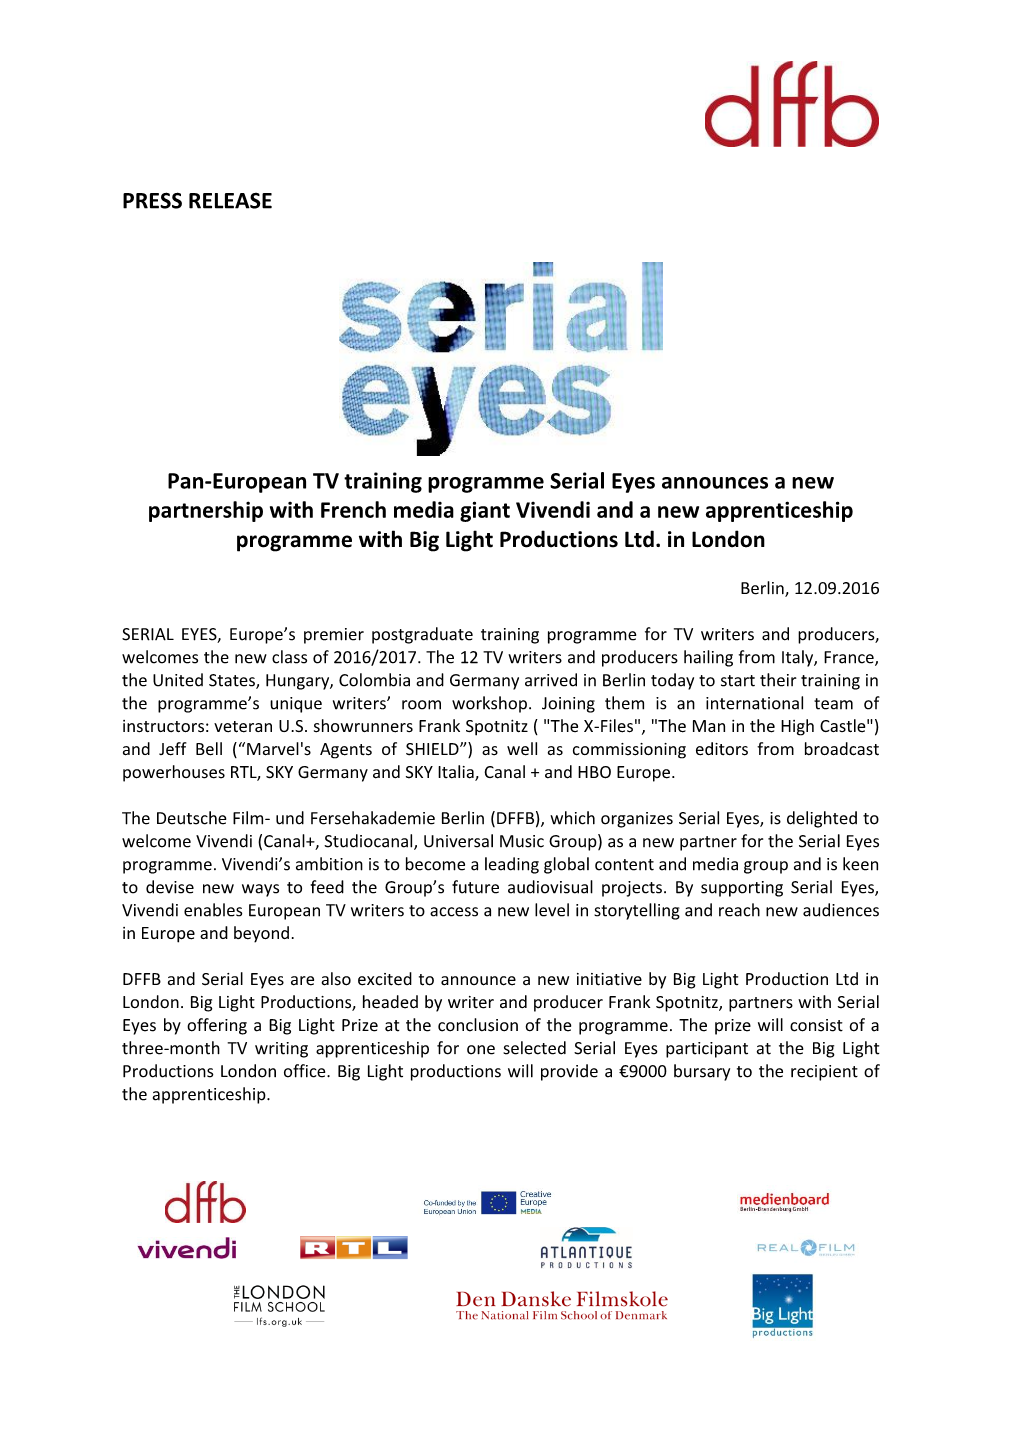 PRESS RELEASE Pan-European TV Training Programme Serial Eyes Announces a New Partnership with French Media Giant Vivendi and A